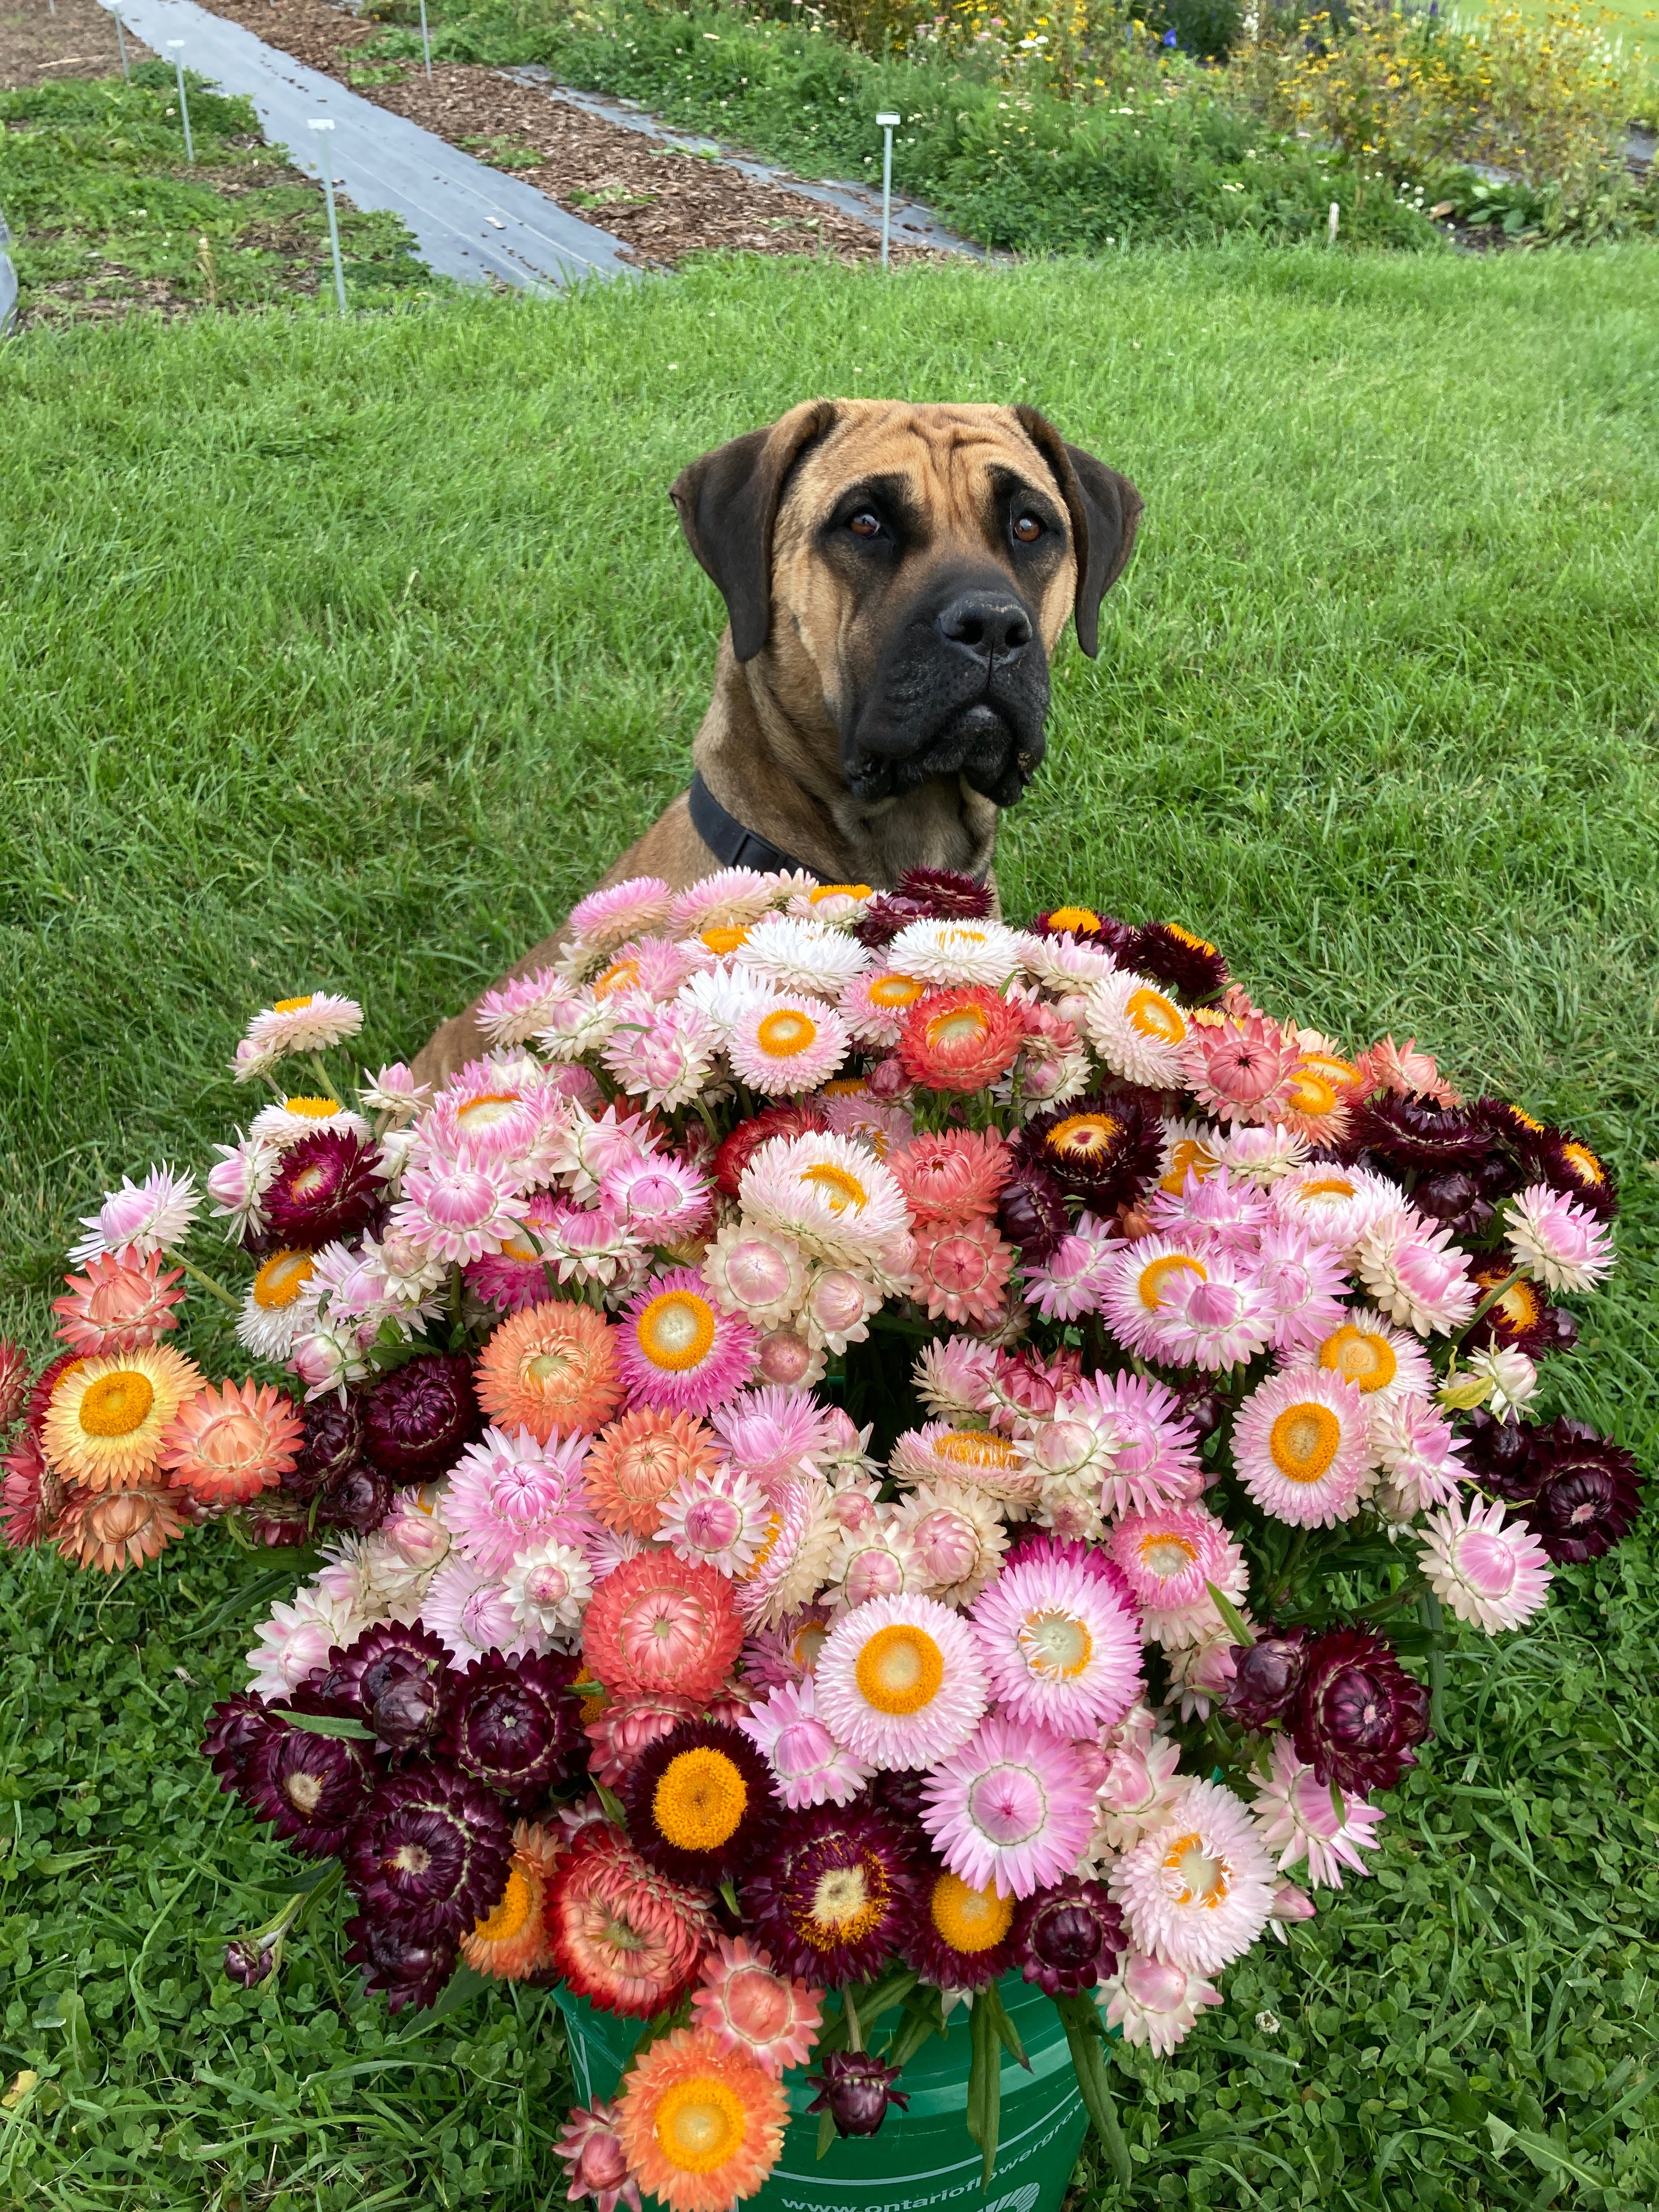 Picture of dog standing behind bucket full of flowers